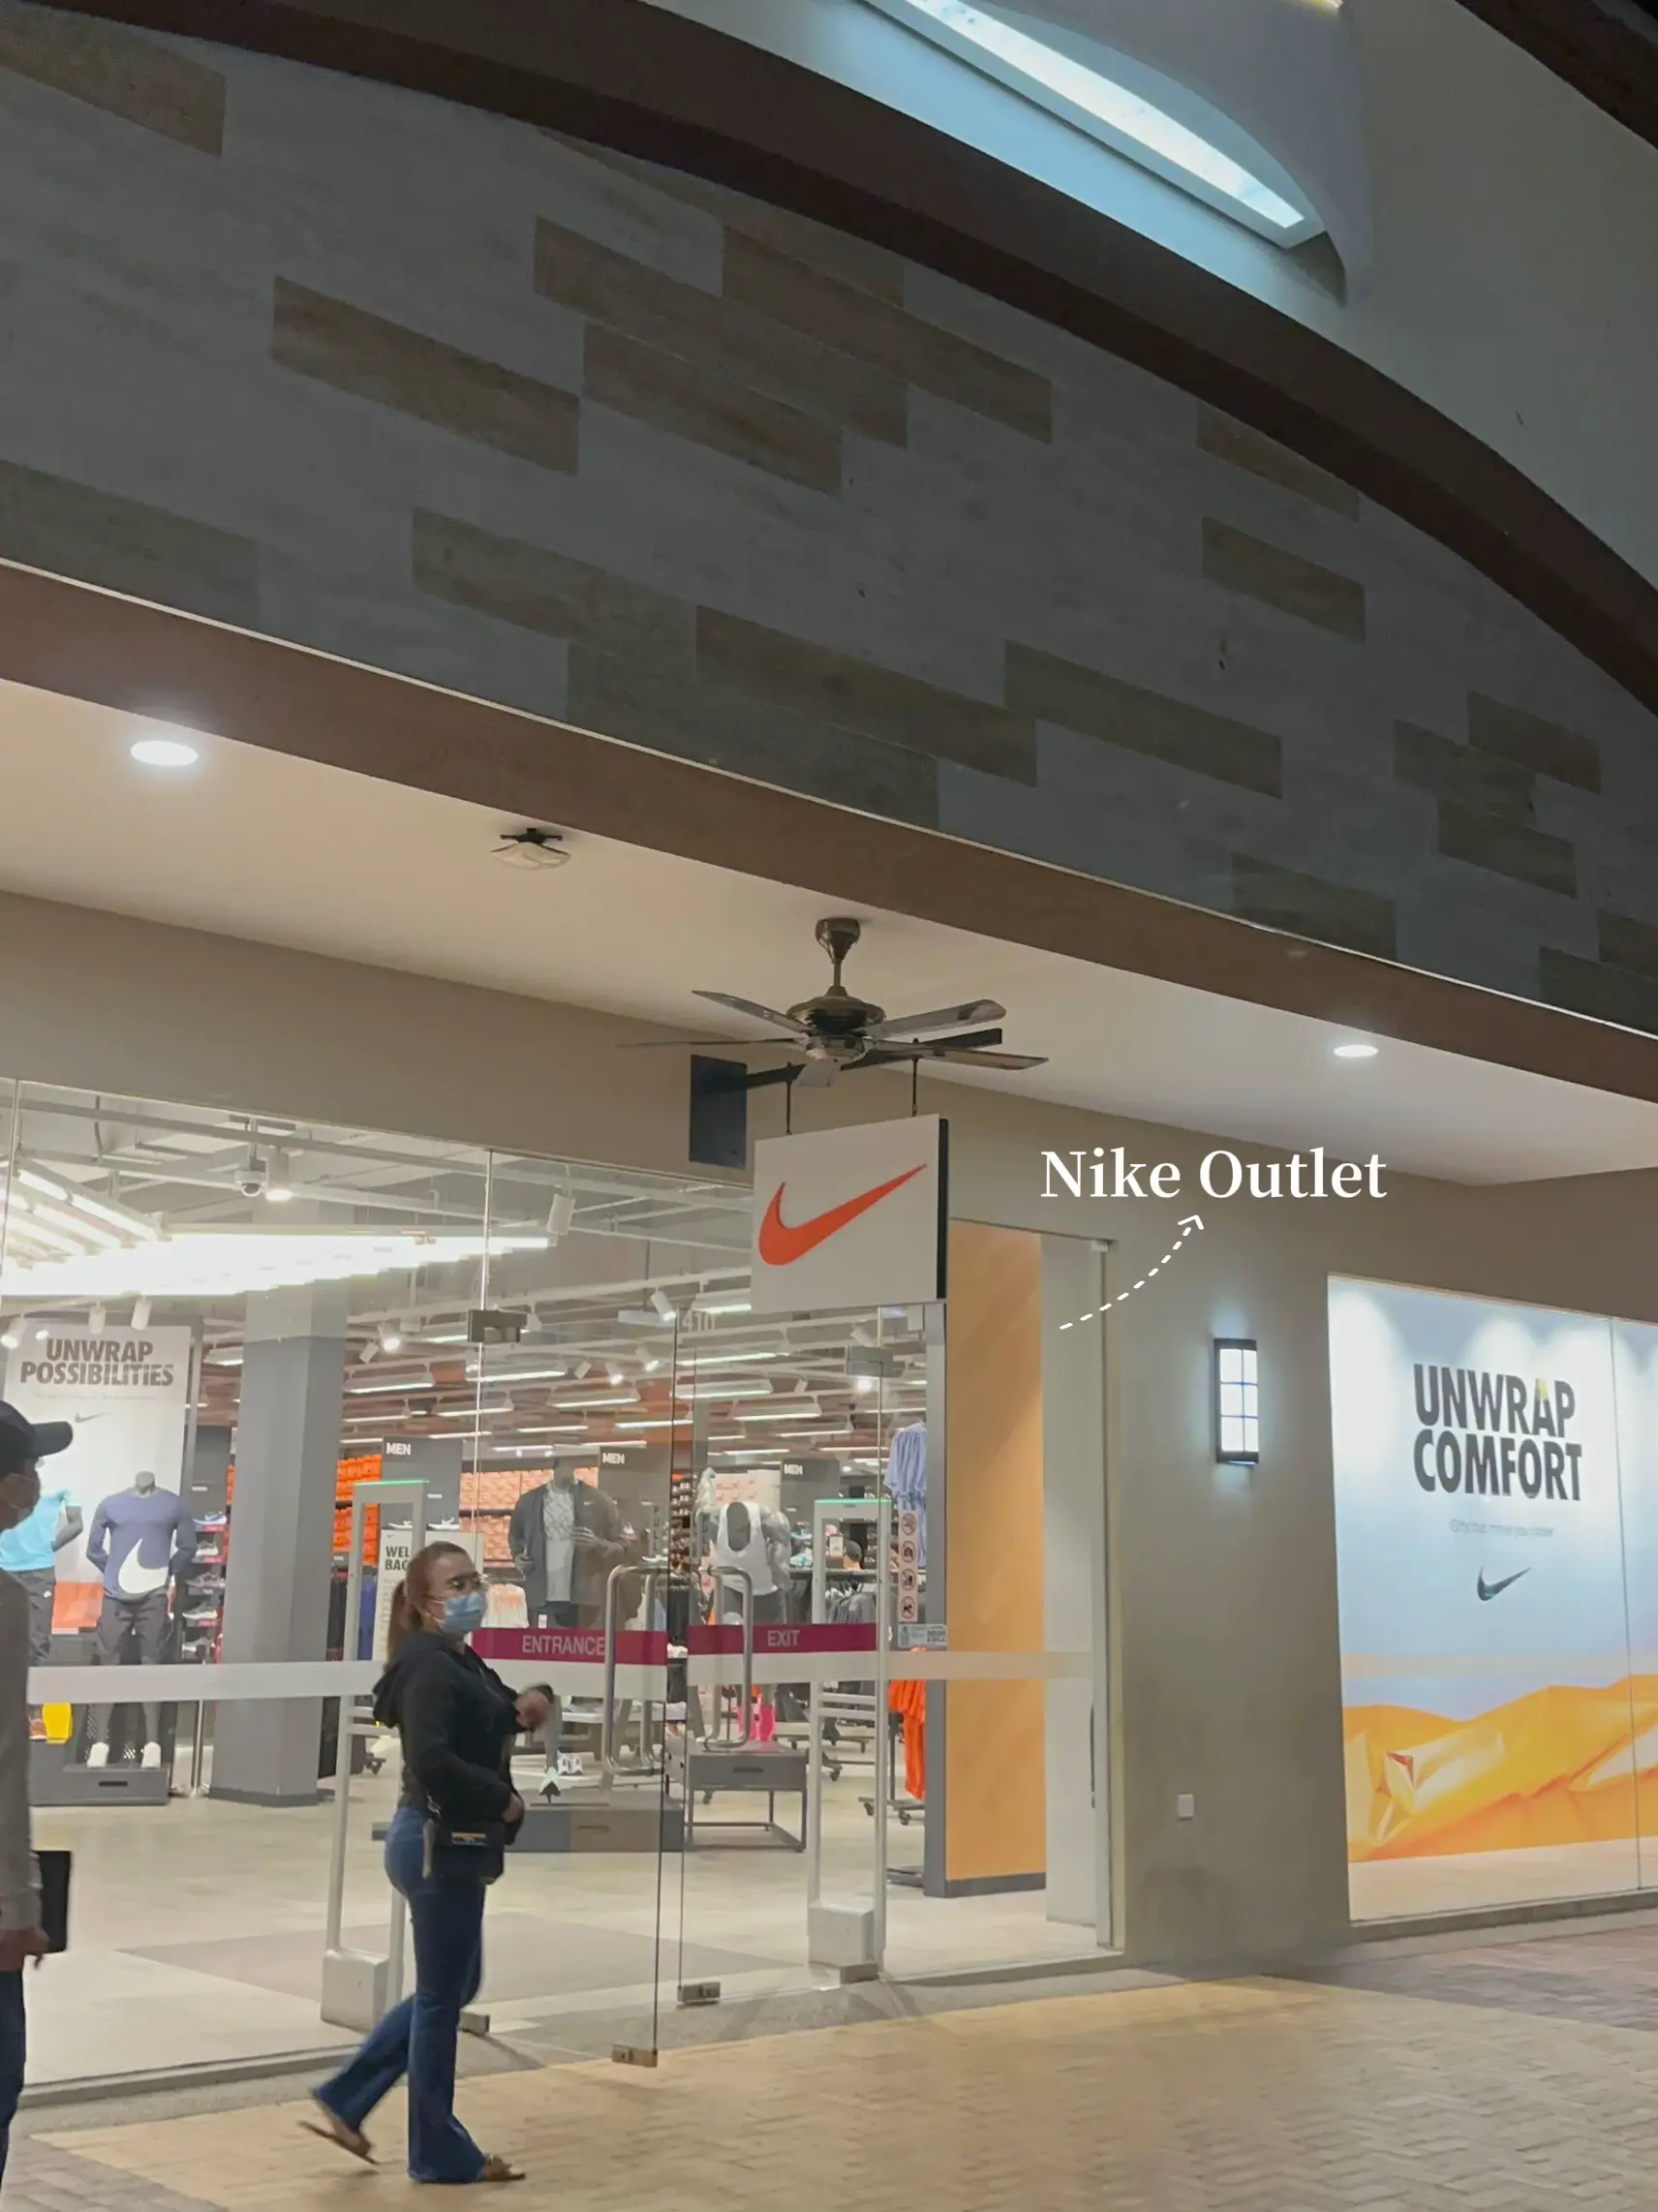 Johor Premium Outlet - Wast of time - Review of Dome, Kulai